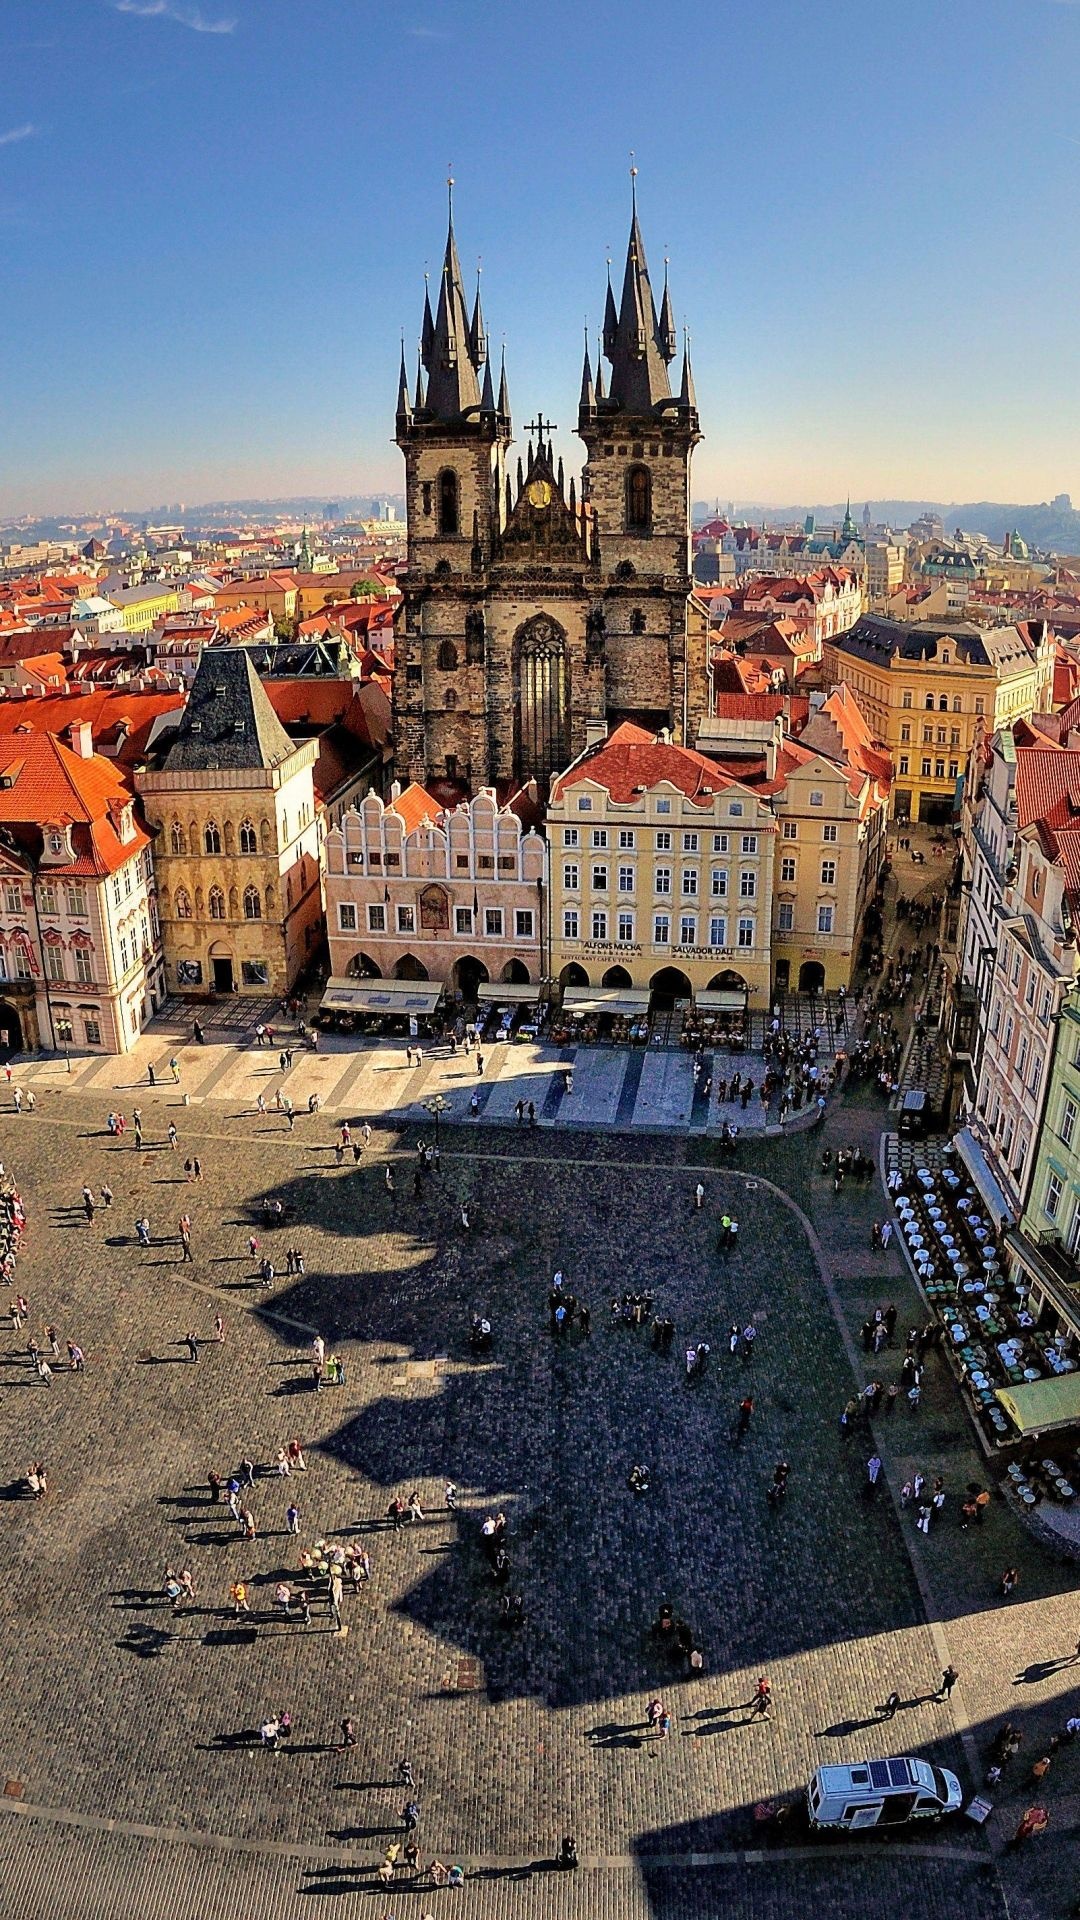 Czechia (Czech Republic): Old Town Square, The oldest and most significant square in the historical center of Prague. 1080x1920 Full HD Wallpaper.